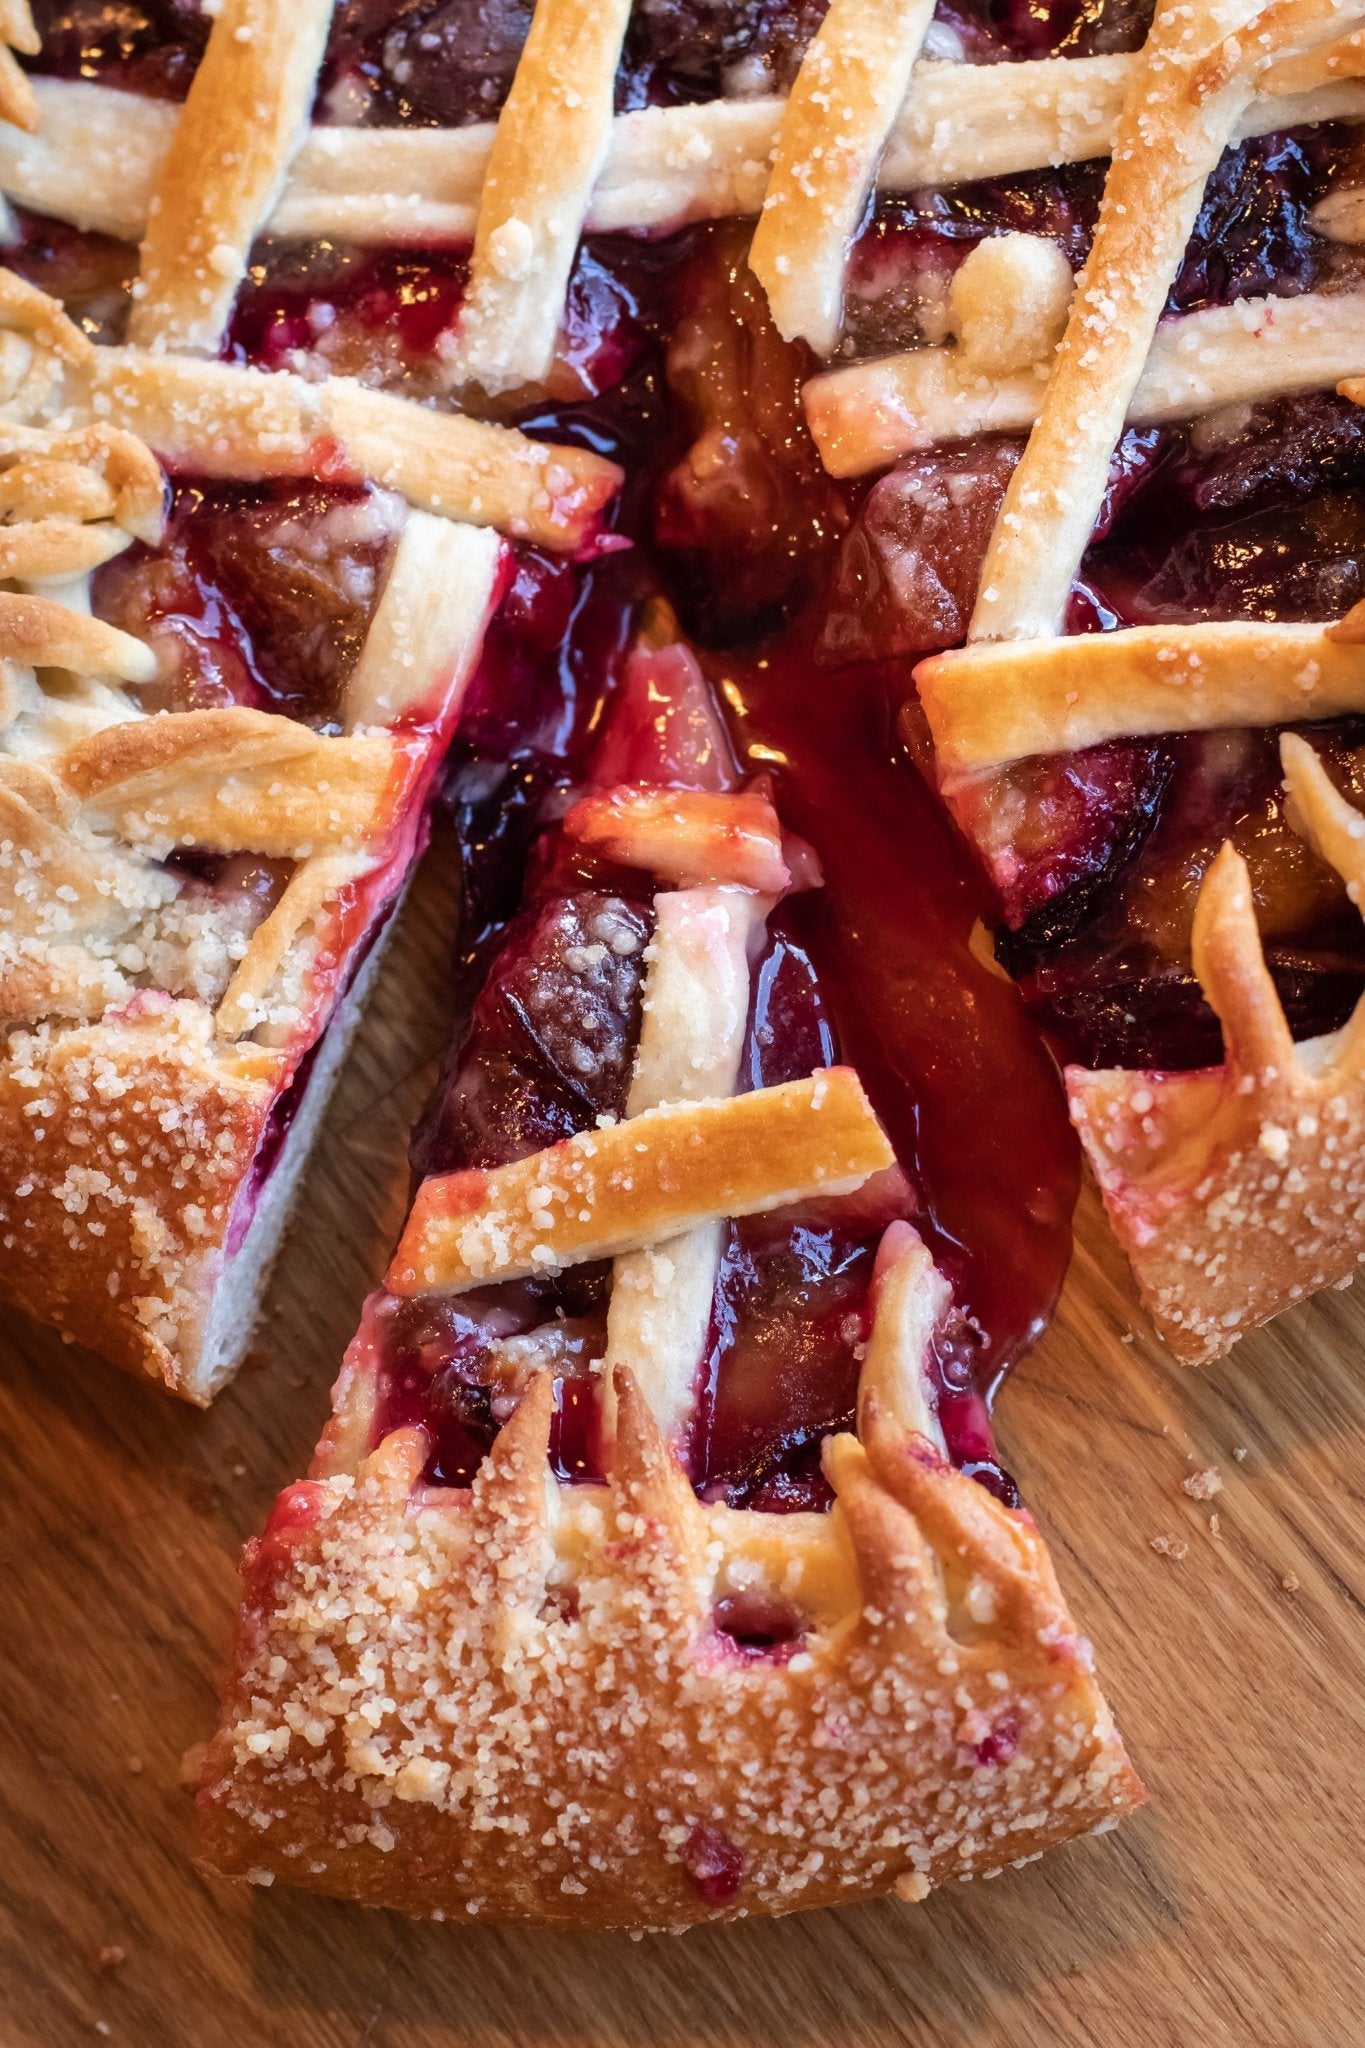 Fruit Pies - Cultured Bakehouse